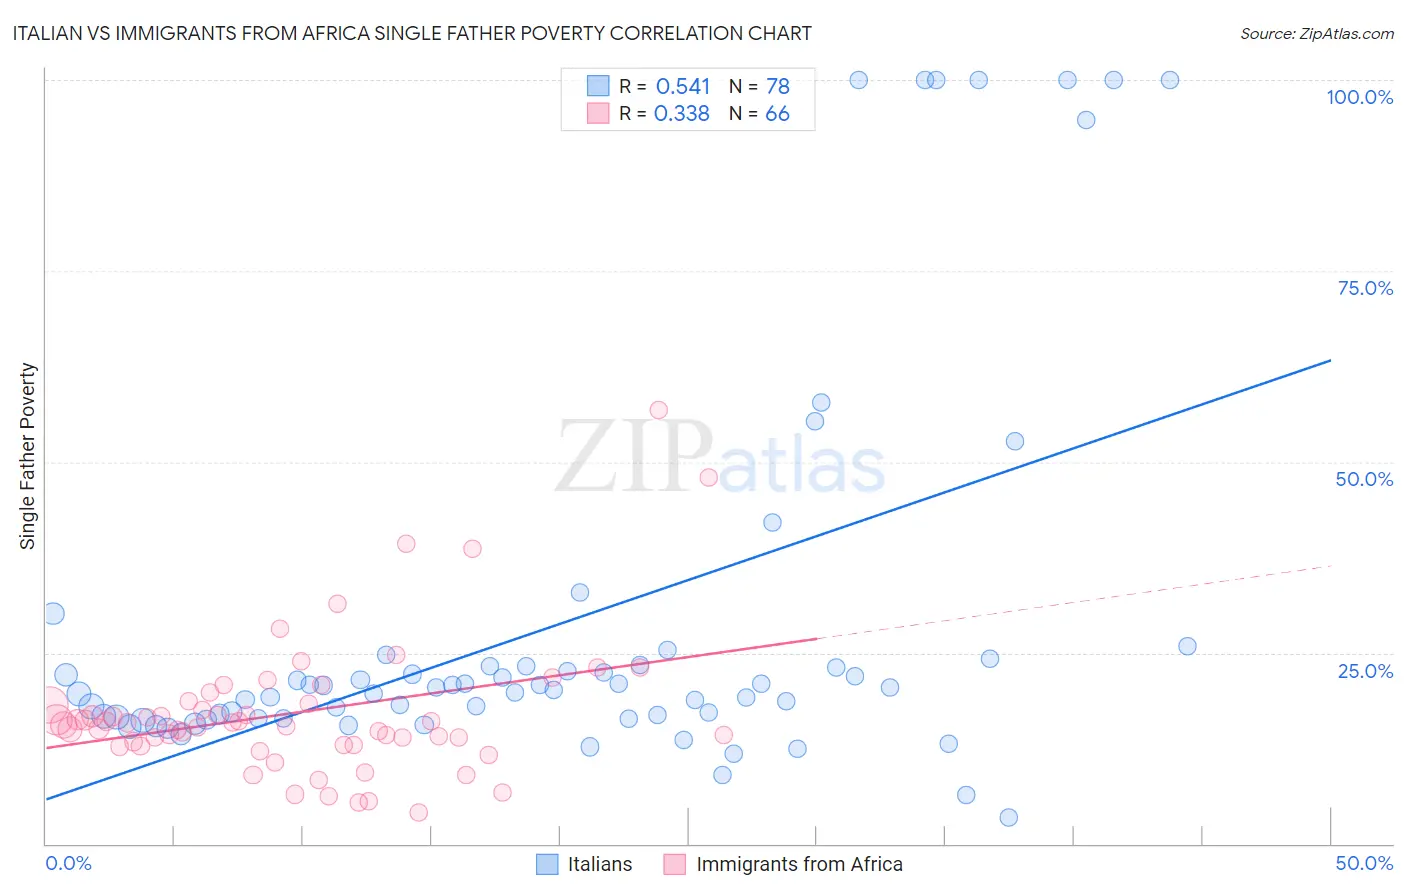 Italian vs Immigrants from Africa Single Father Poverty